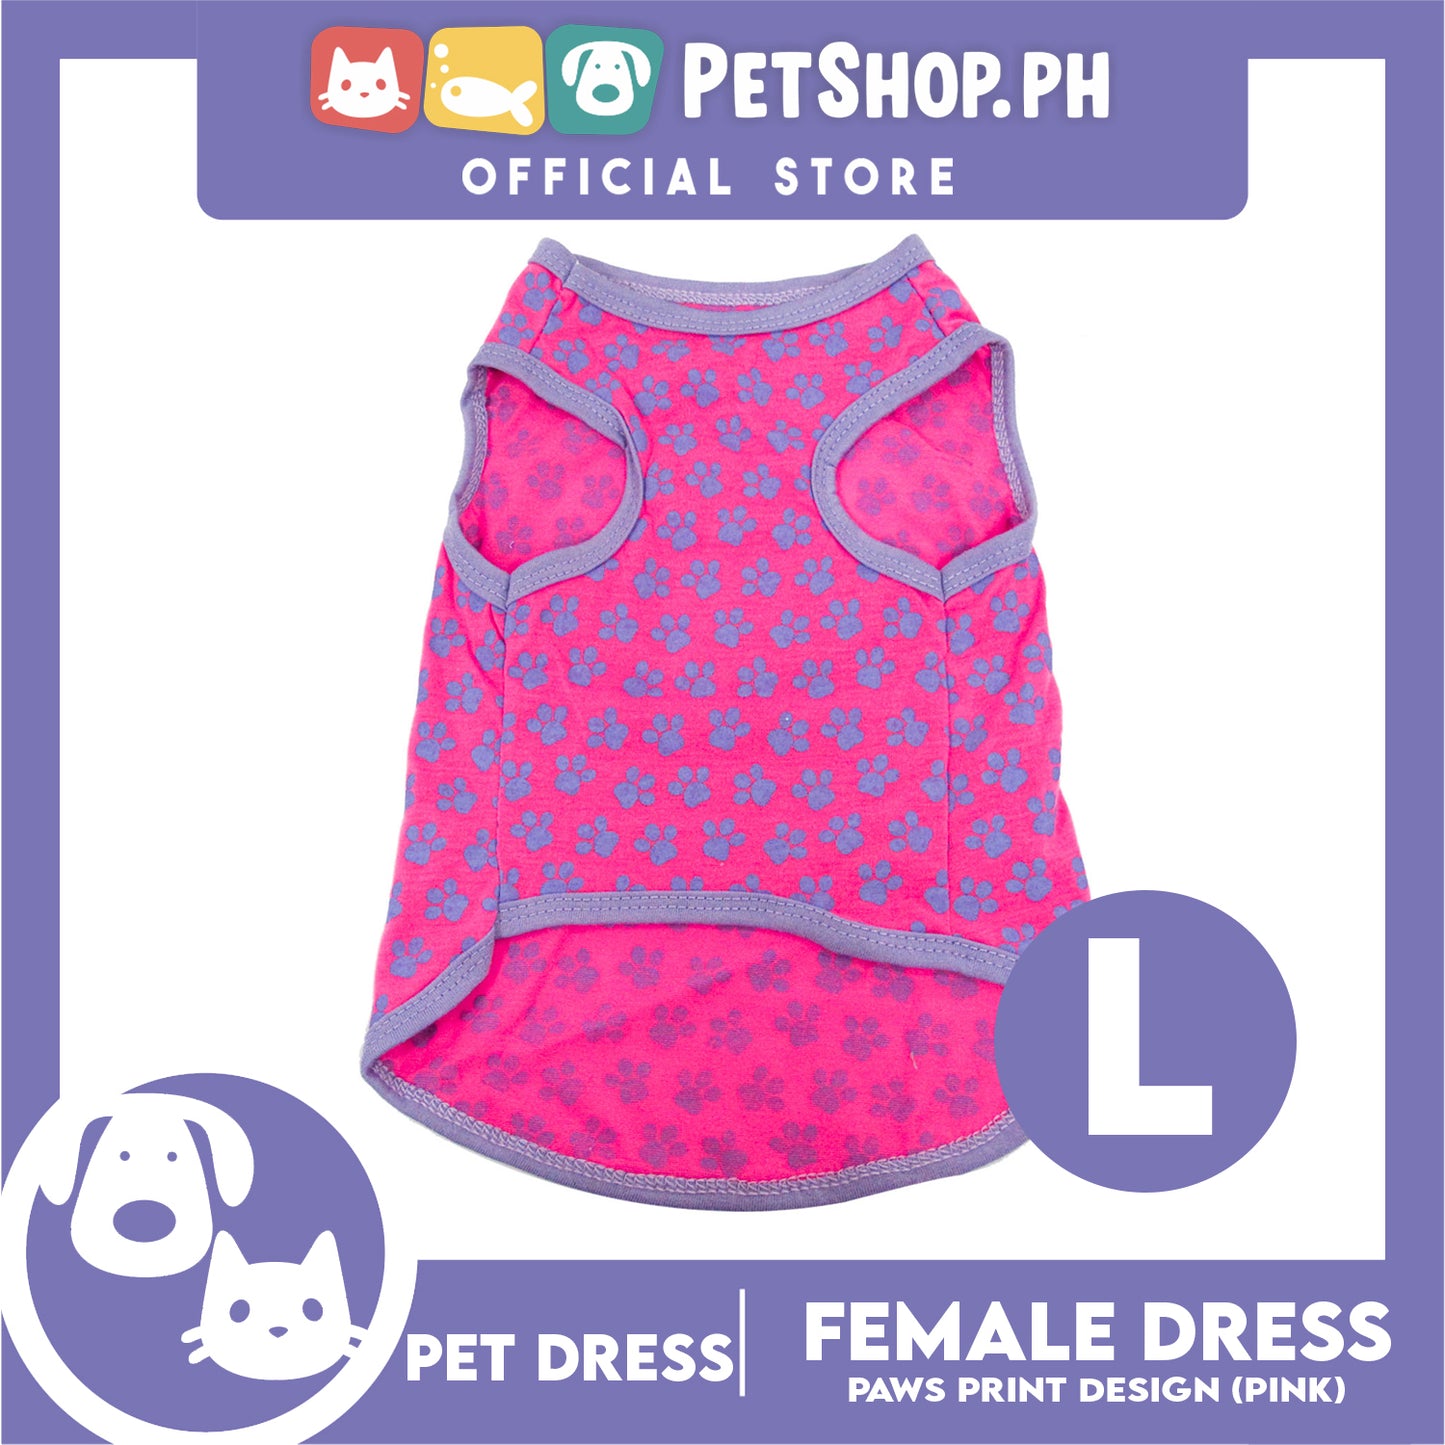 Pet Shirt Blue Paw Design (Large Size) Sleeveless for Puppy, Small Dog- Sando Breathable Clothes, Pet T-shirt, Sweat Shirt